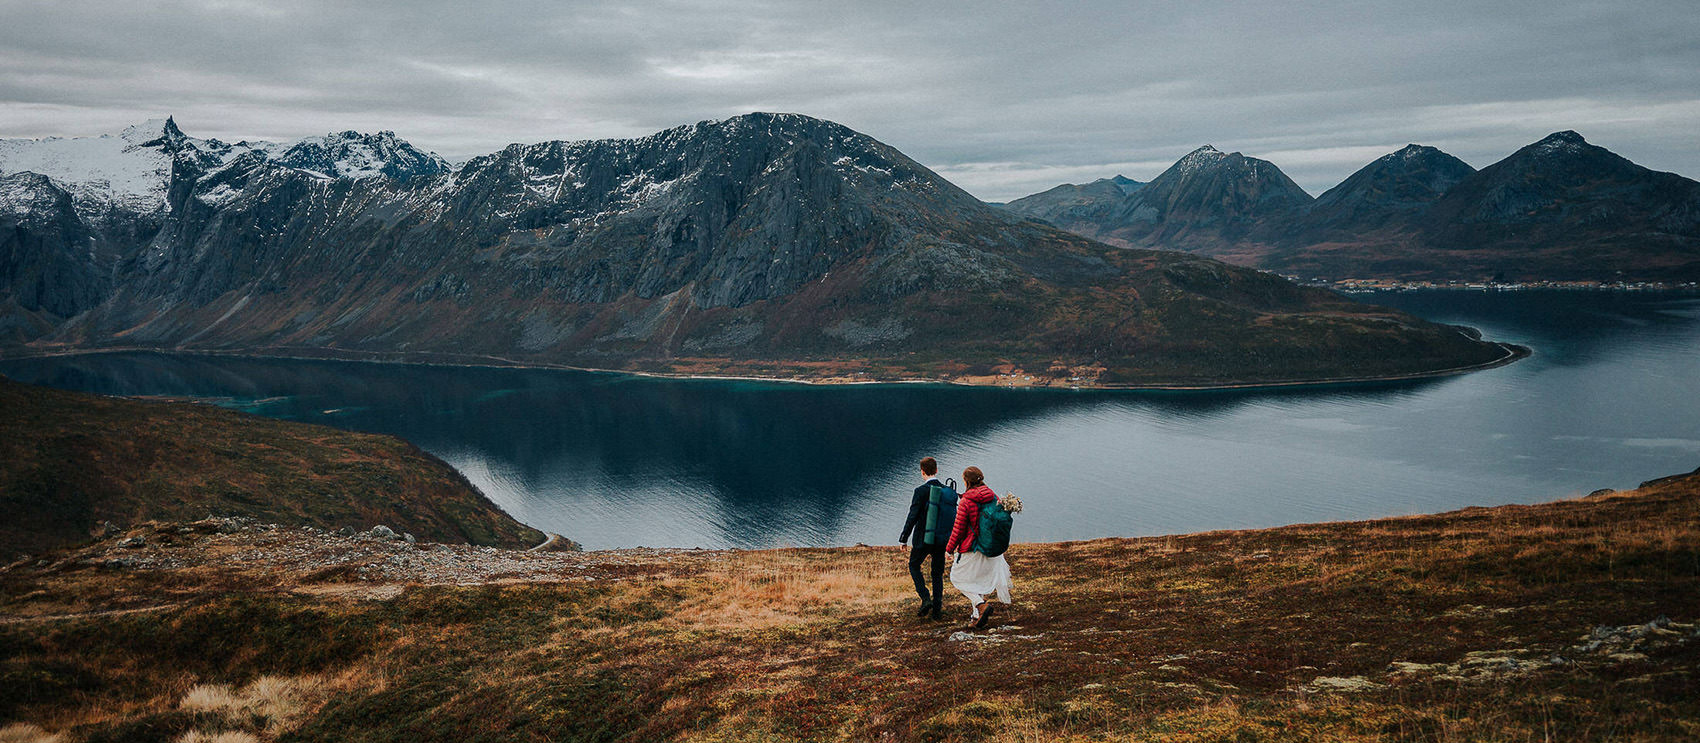 Bride and groom hiking in the mountains of Tromsø on their elopement day. There is a view of snow-capped mountains in the background and the fall colors on the ground